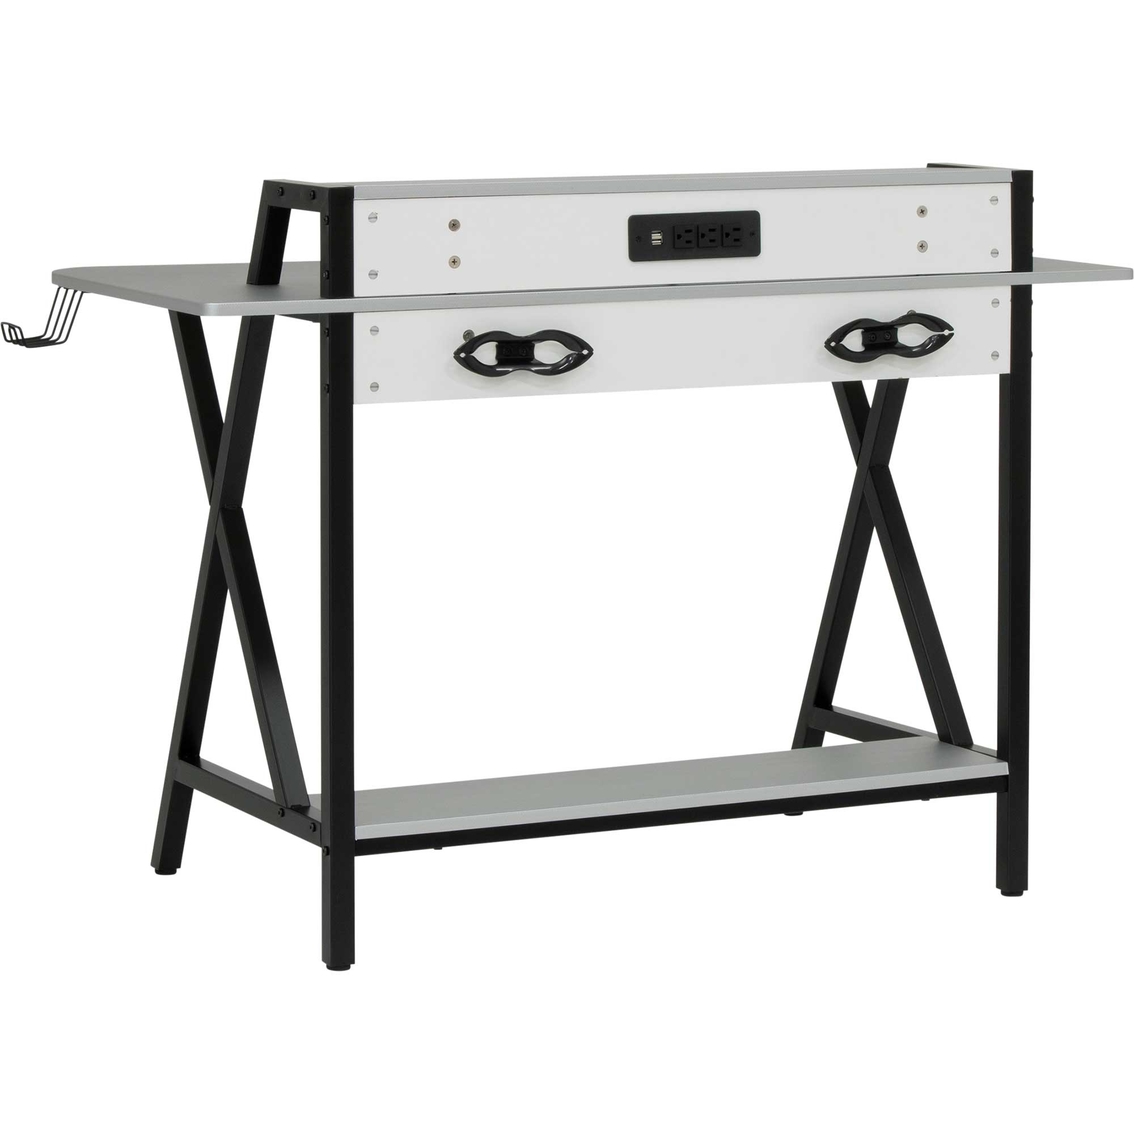 Calico Designs SD Gaming Challenger PC Gamer Computer Desk - Image 6 of 10